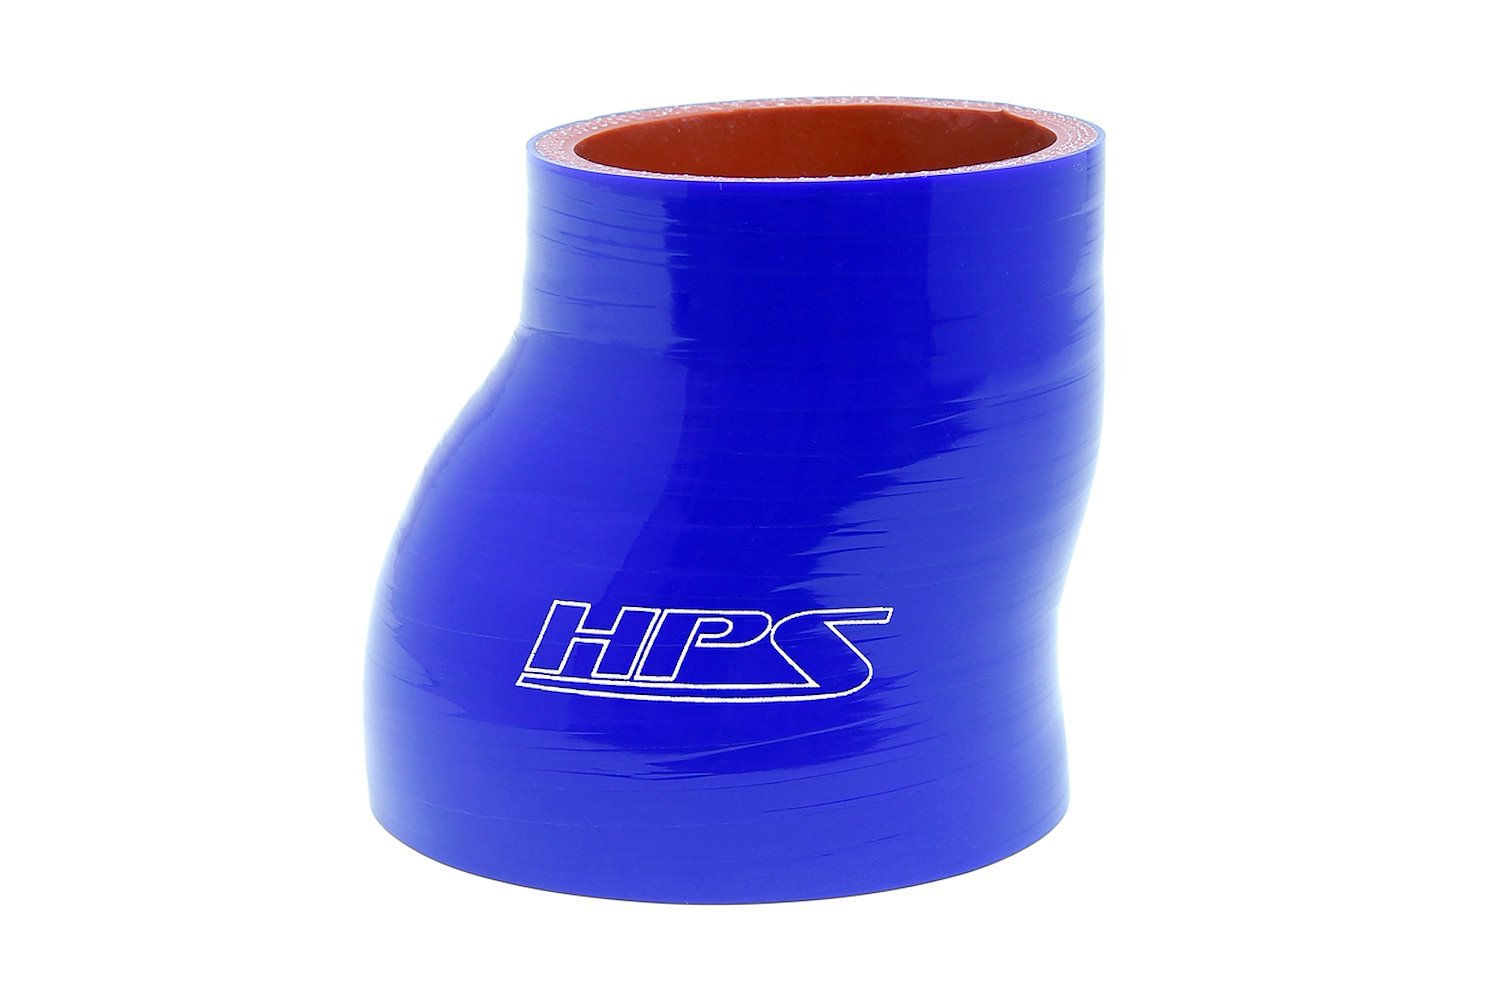 HTSOR-250-275-BLUE Offset Reducer, High-Temp 4-Ply Reinforced, 2 1/2 in. ID To 2 3/4 in. ID, 3 in. Length.